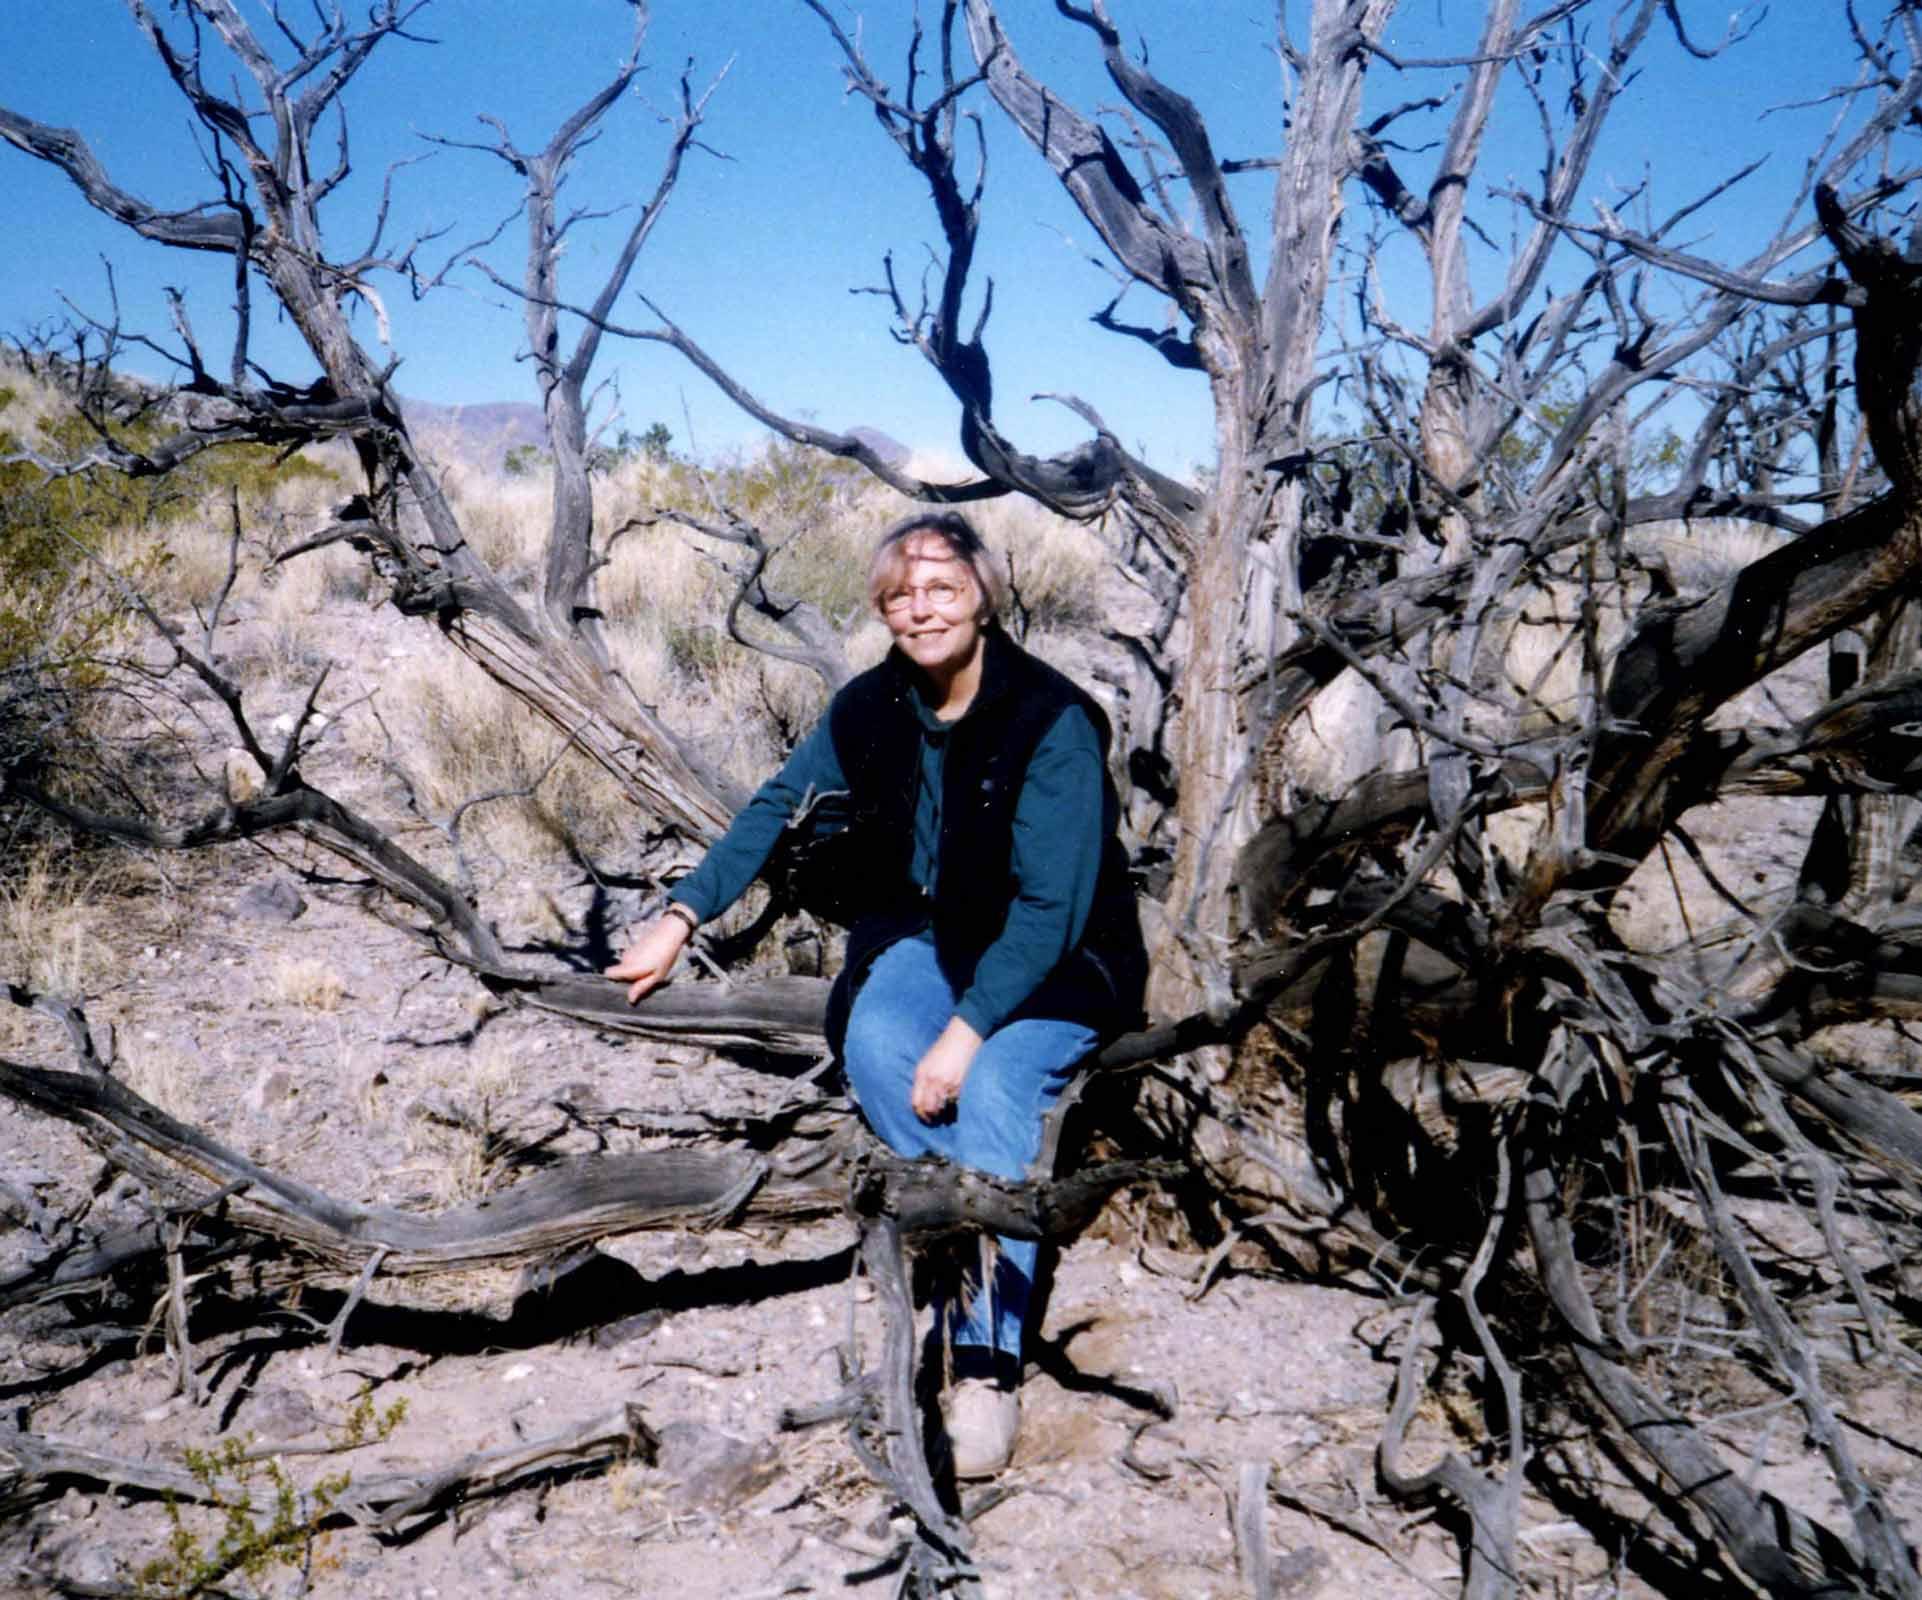 Nancy Holt sitting in an old juniper tree in New Mexico